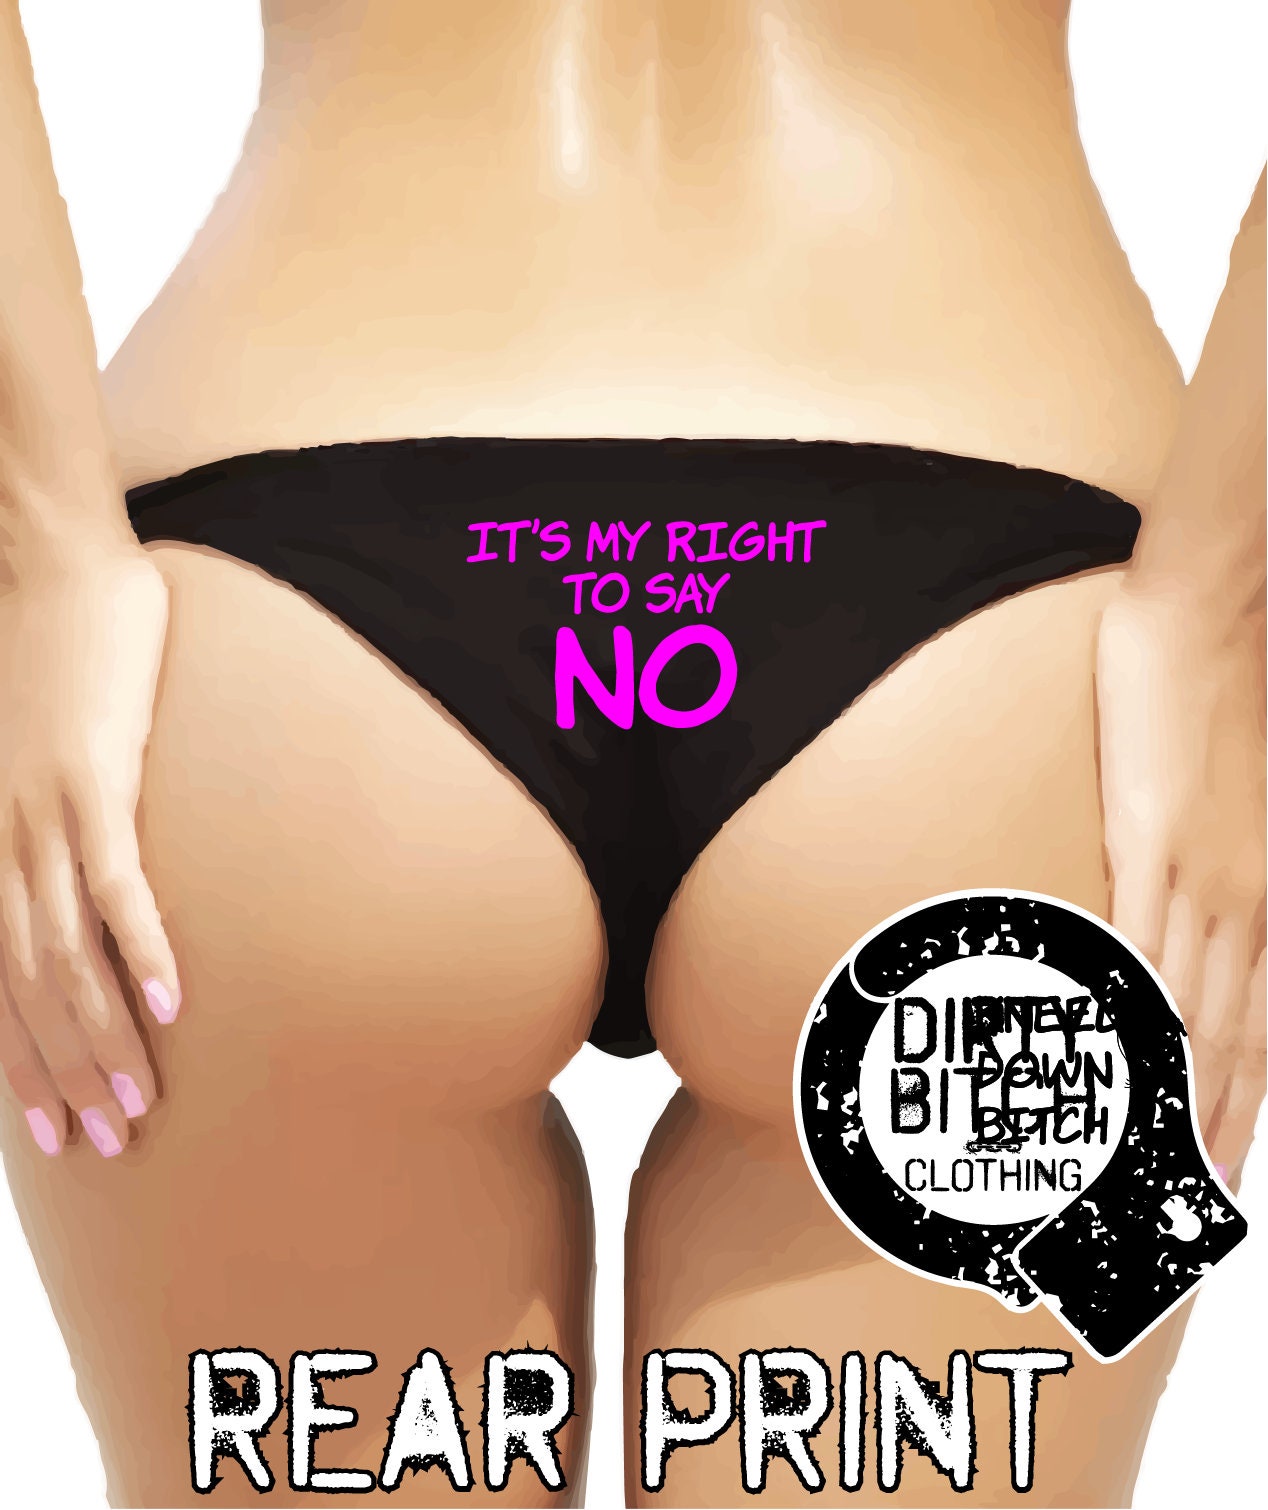 Its My Right to Say No rear Print Adult image pic picture